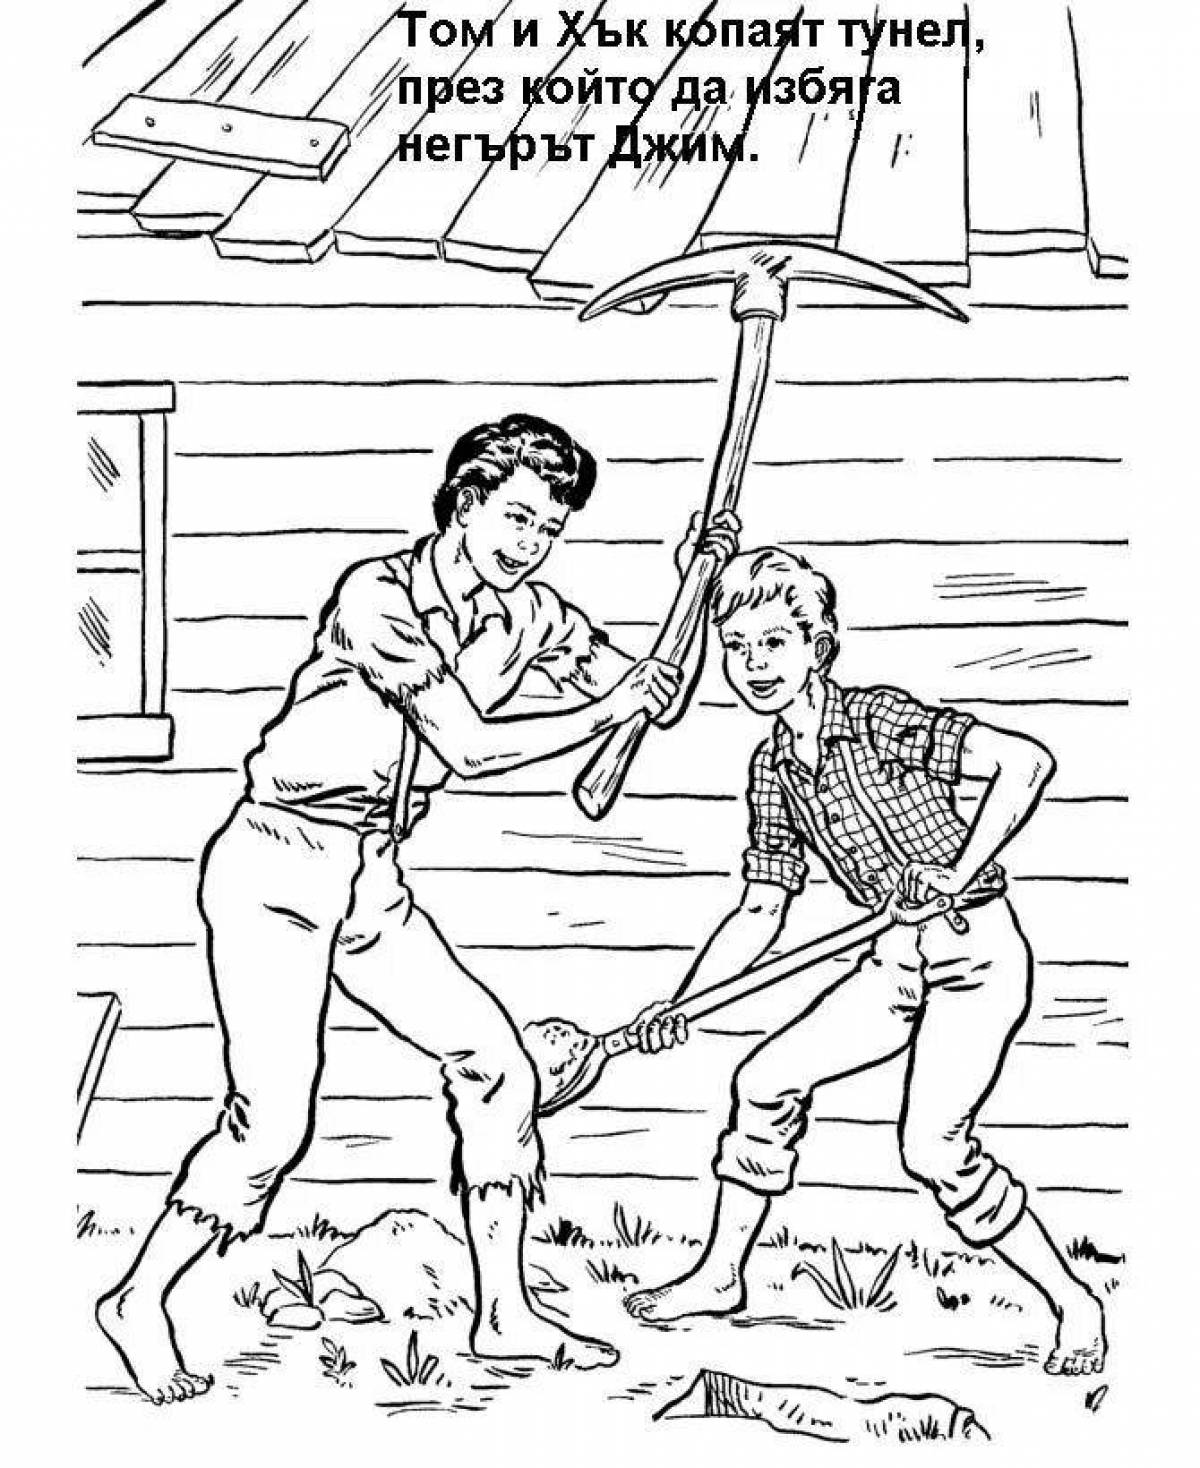 Photo Witty tom sawyer coloring book